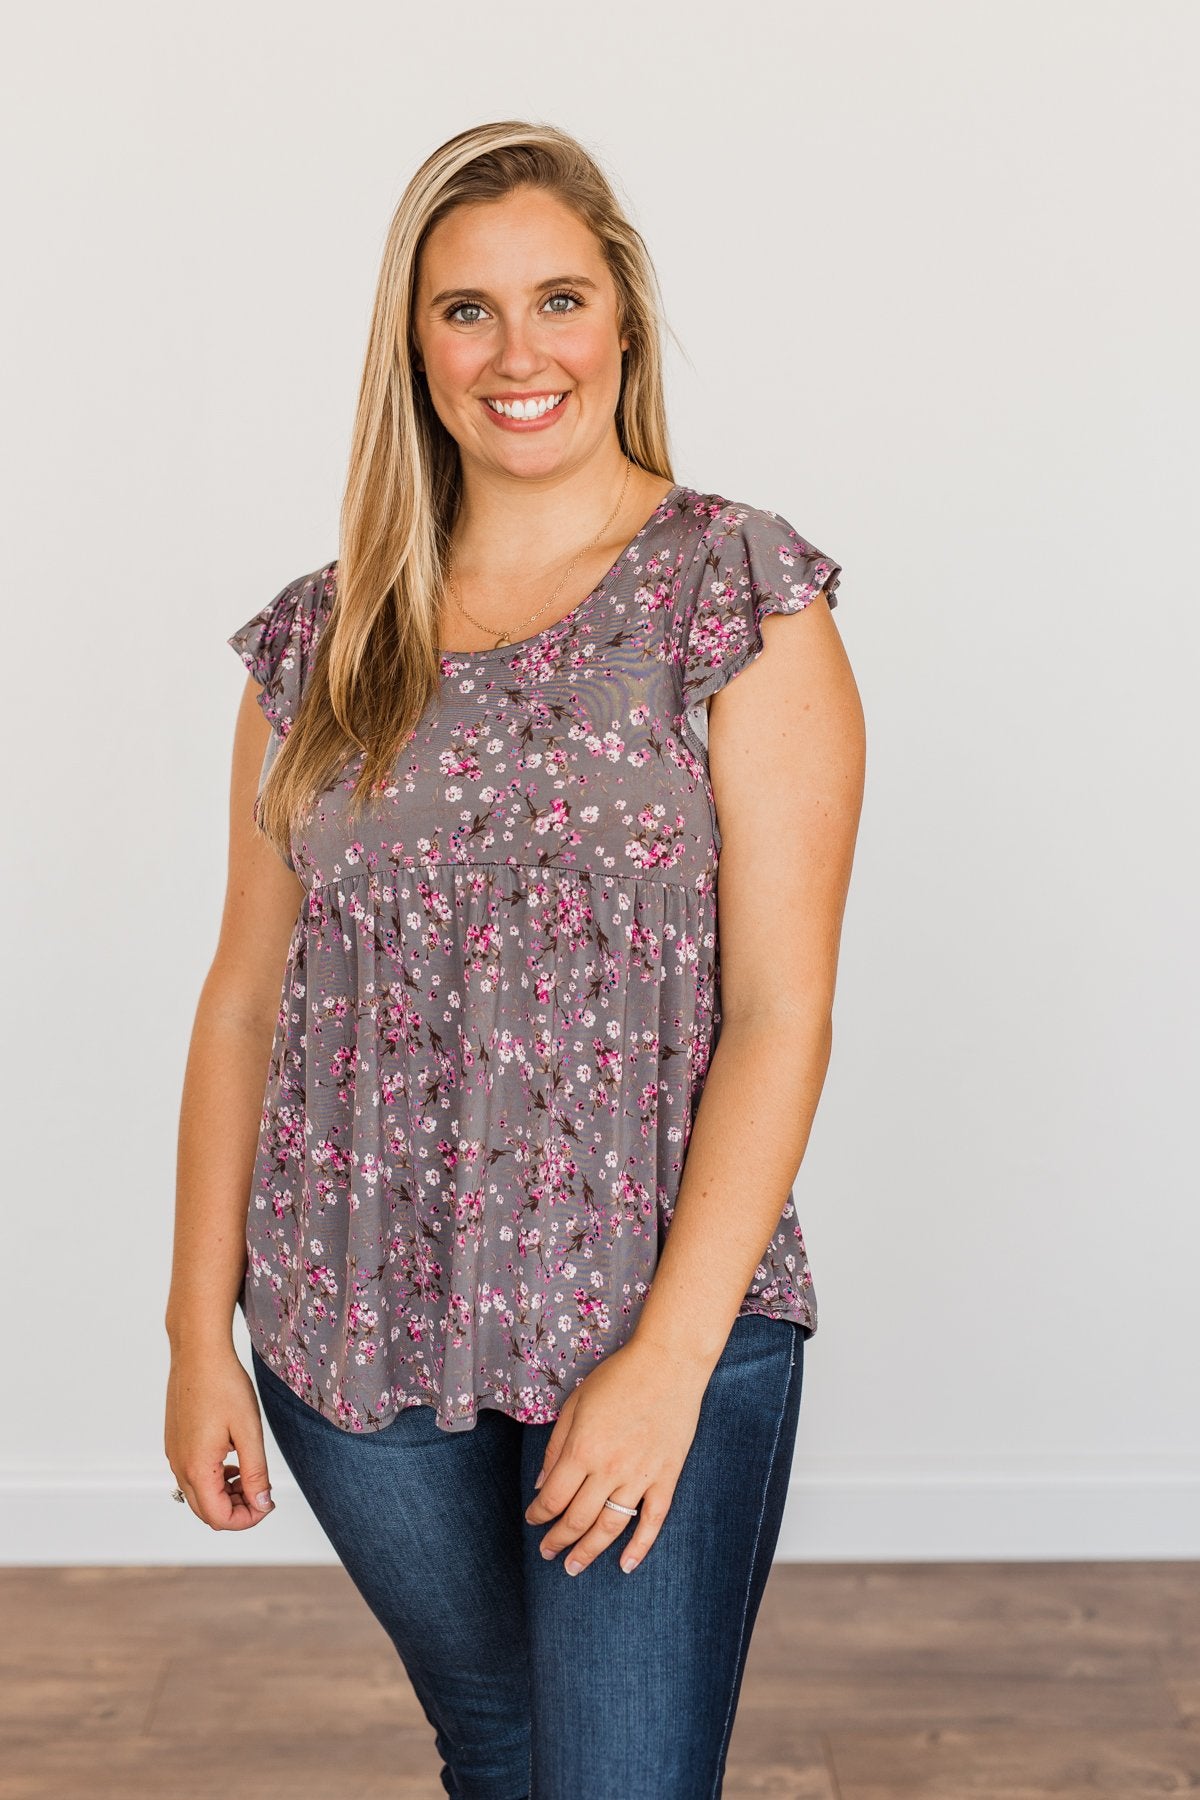 Gardens Of Flowers Floral Top- Grey & Pink